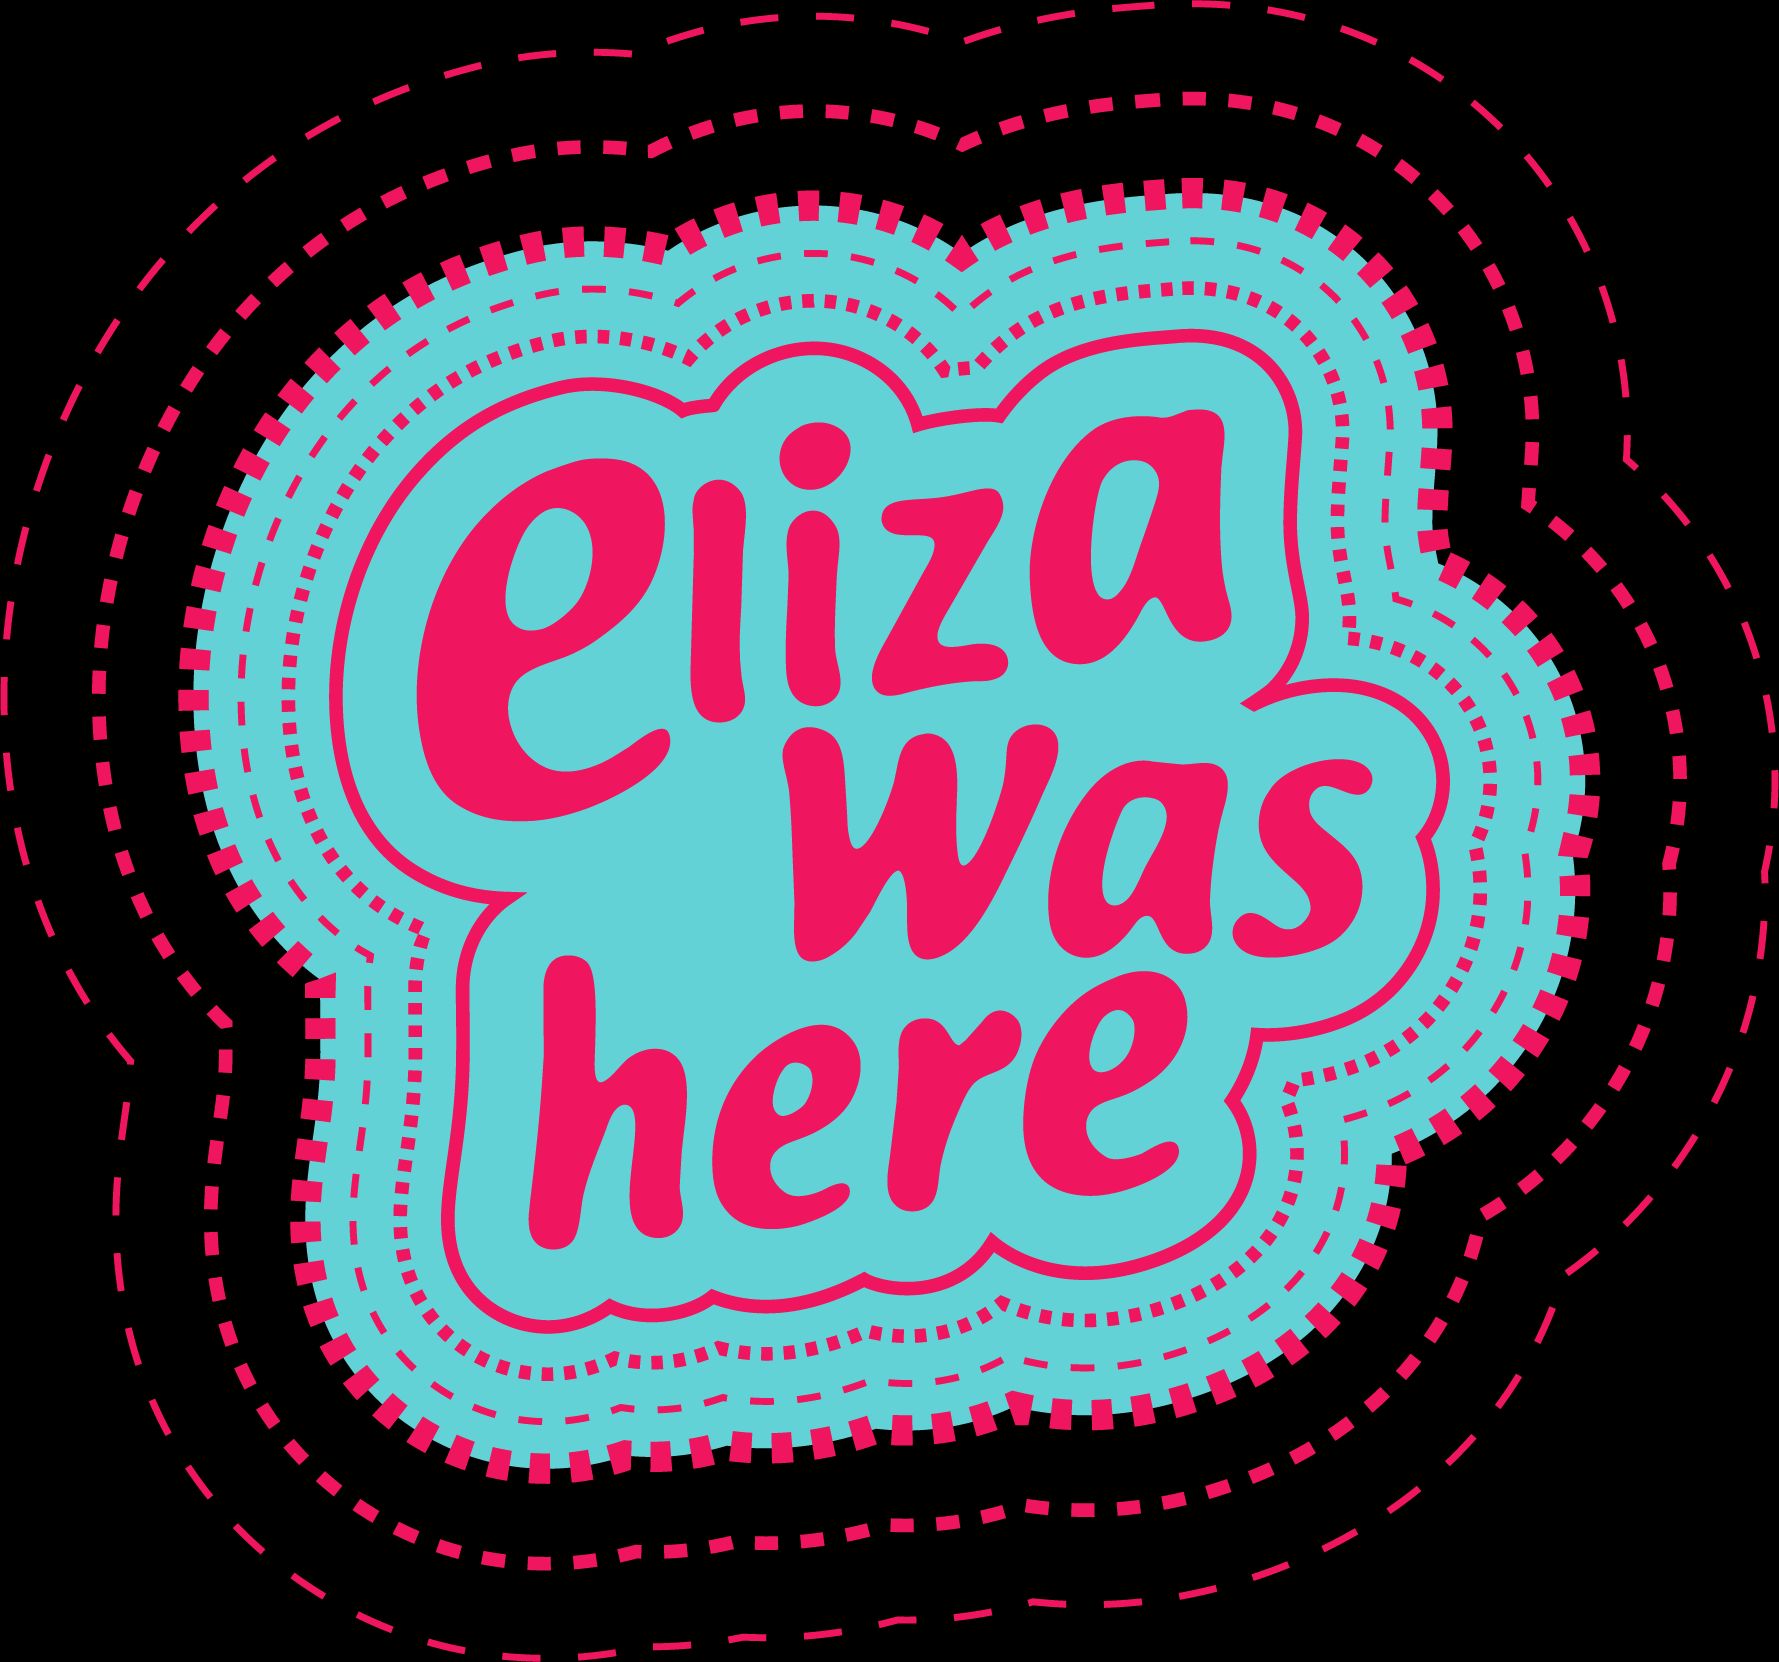 Eliza was Here (BE)